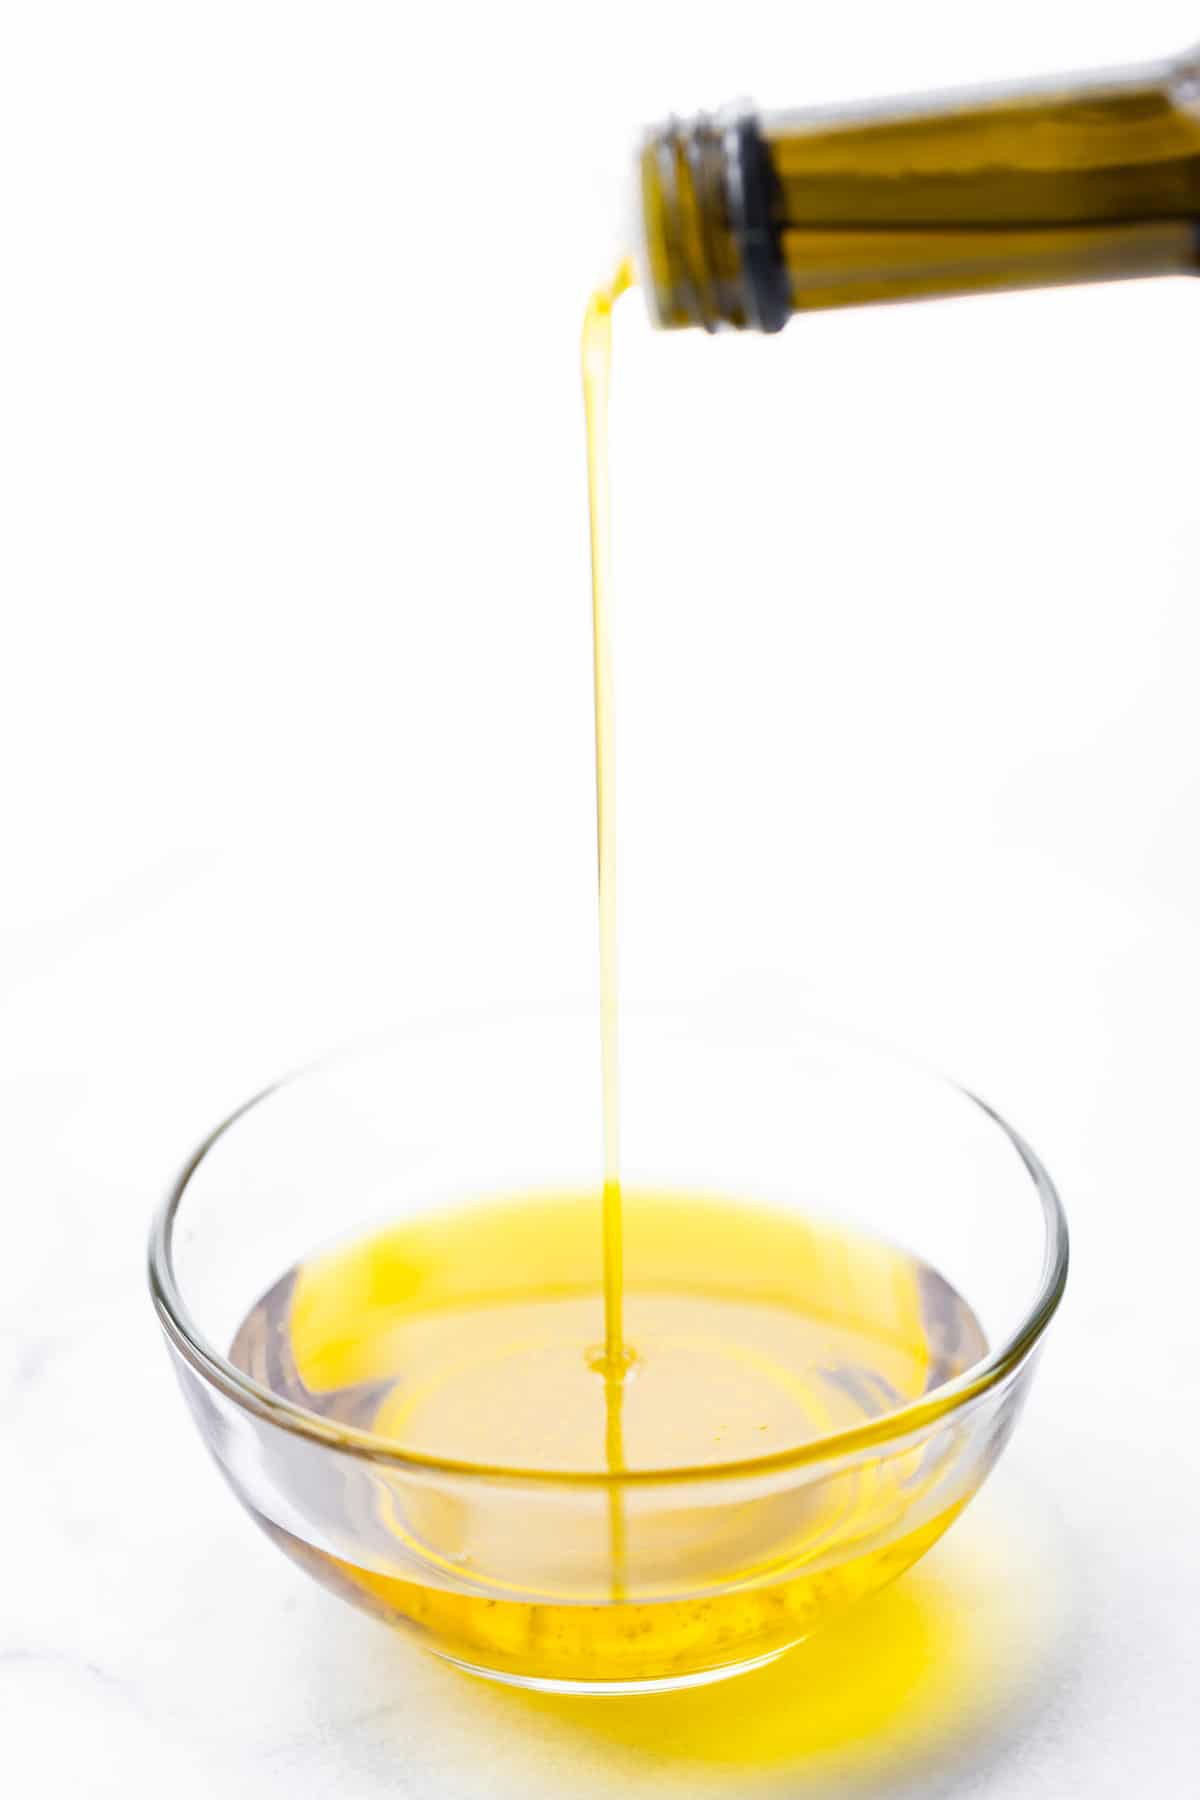 olive oil pouring into a small glass bowl